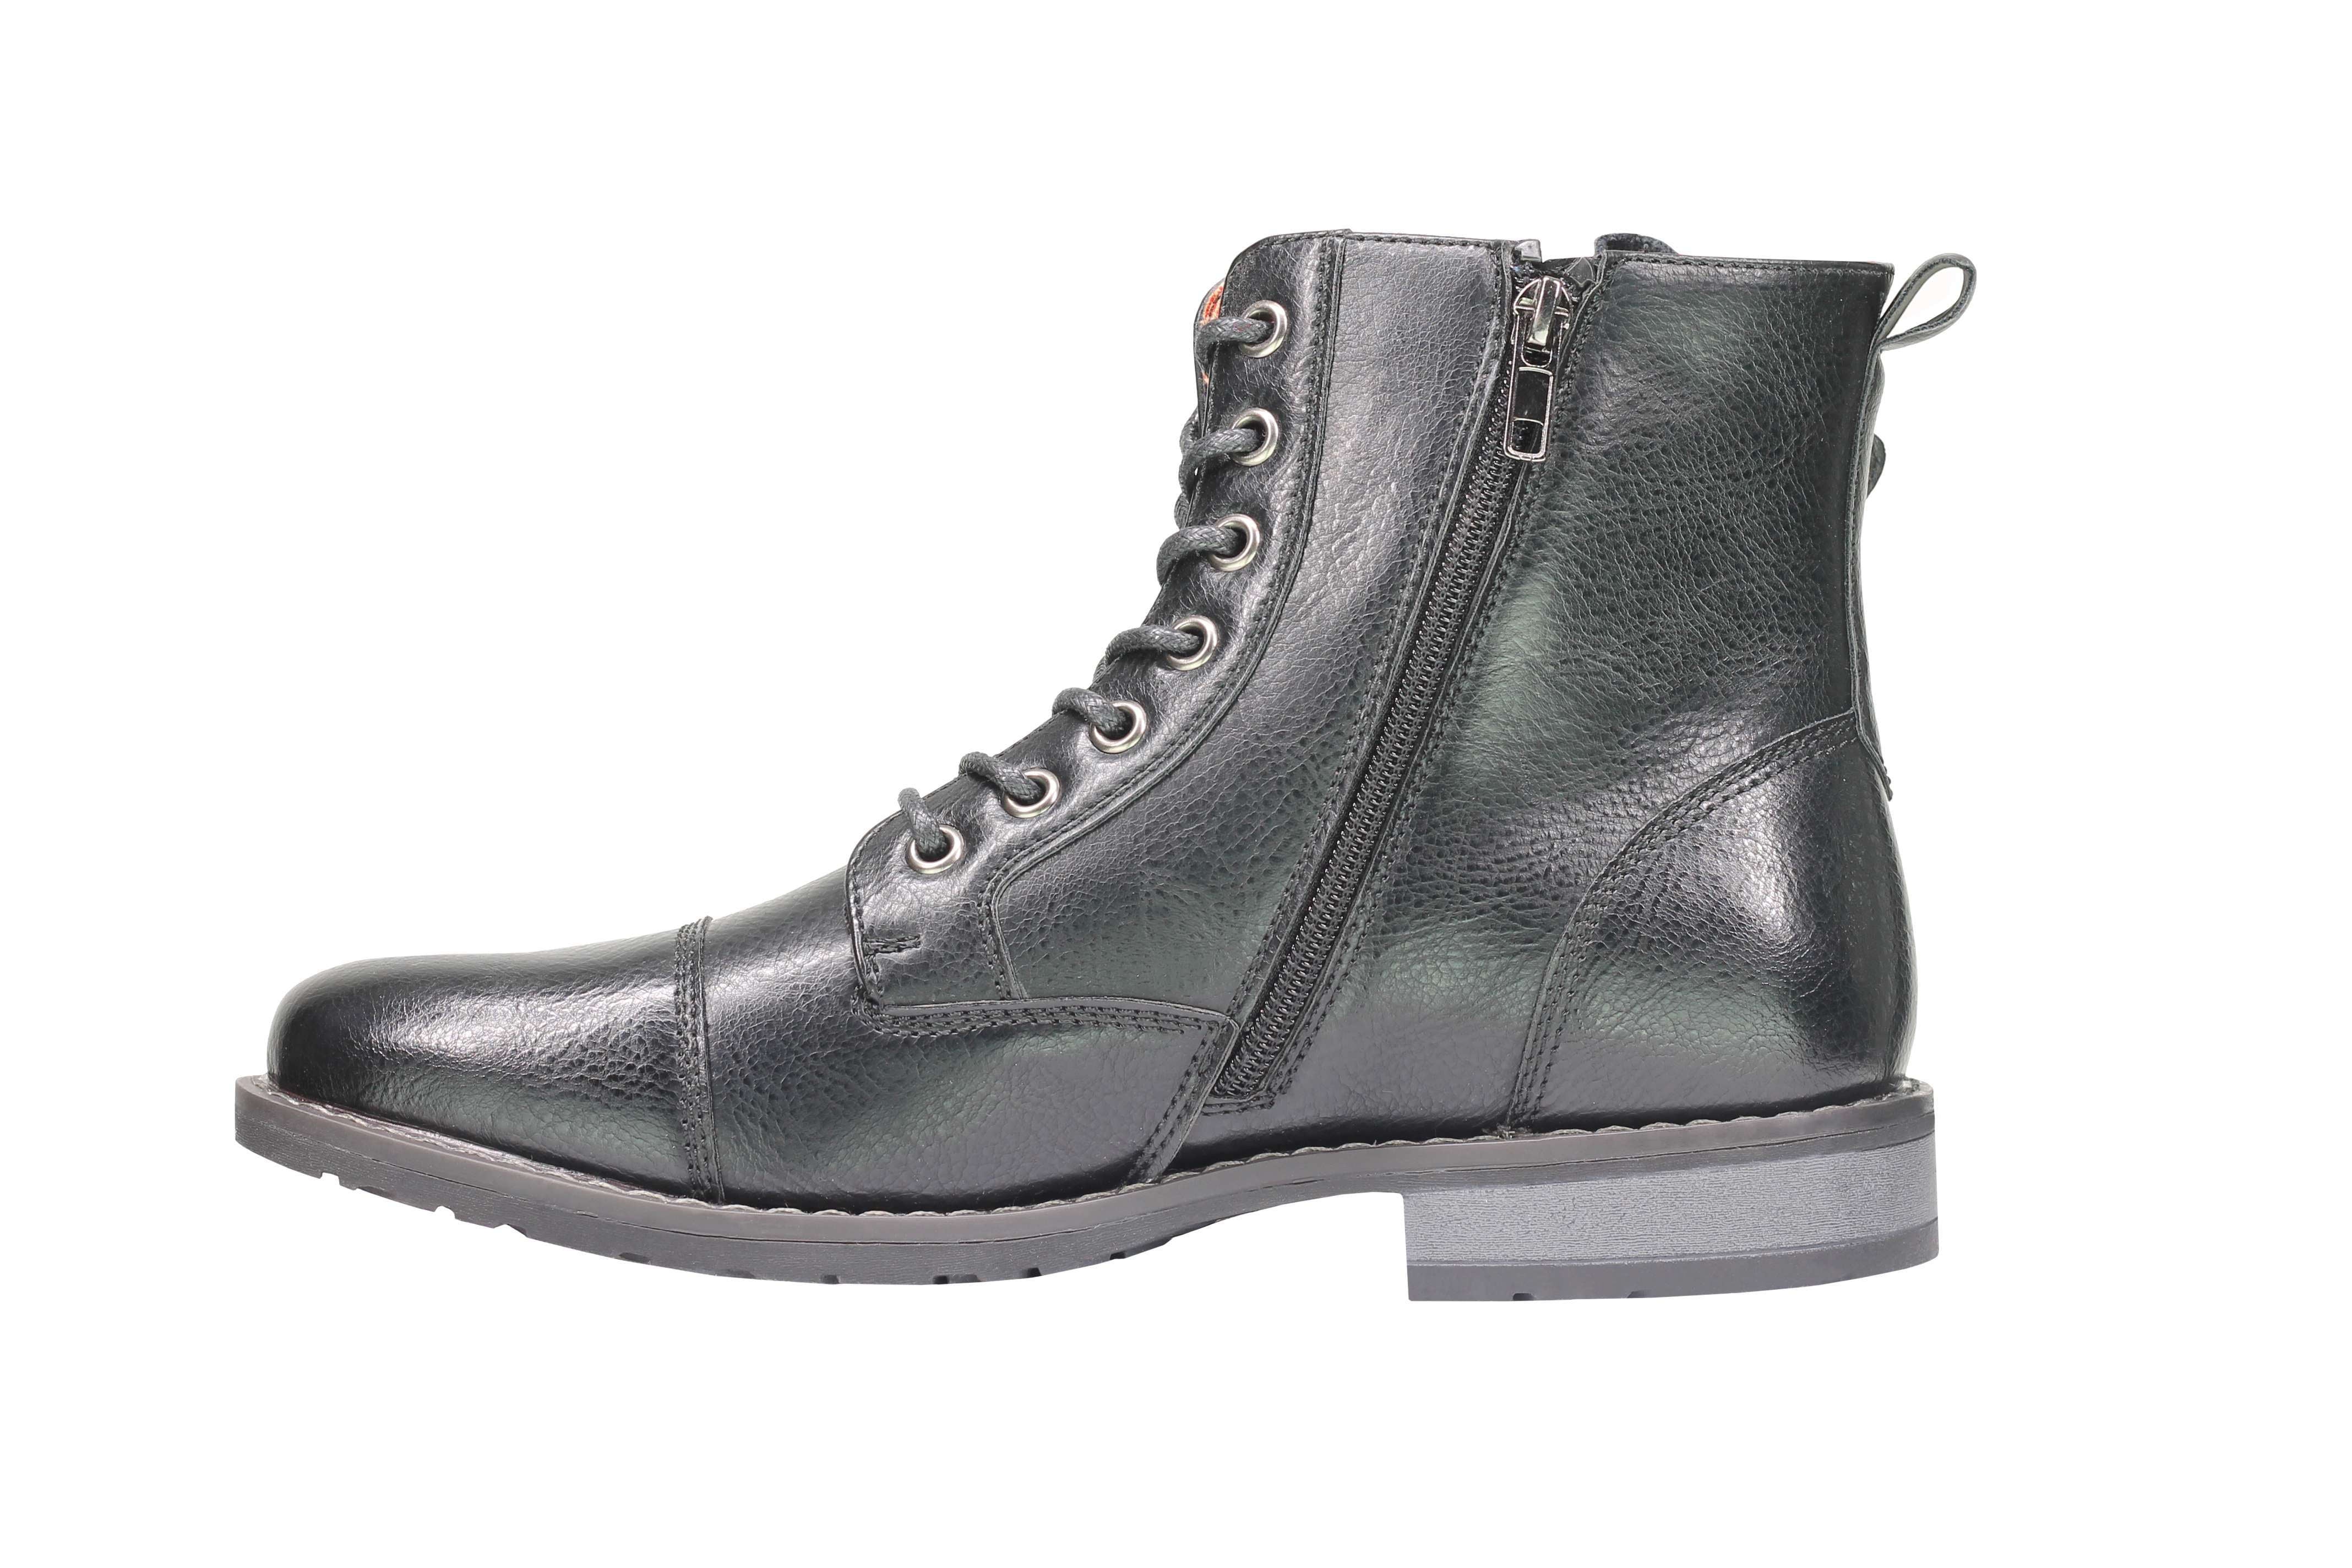 Military Combat Lace Up Boots With Zip